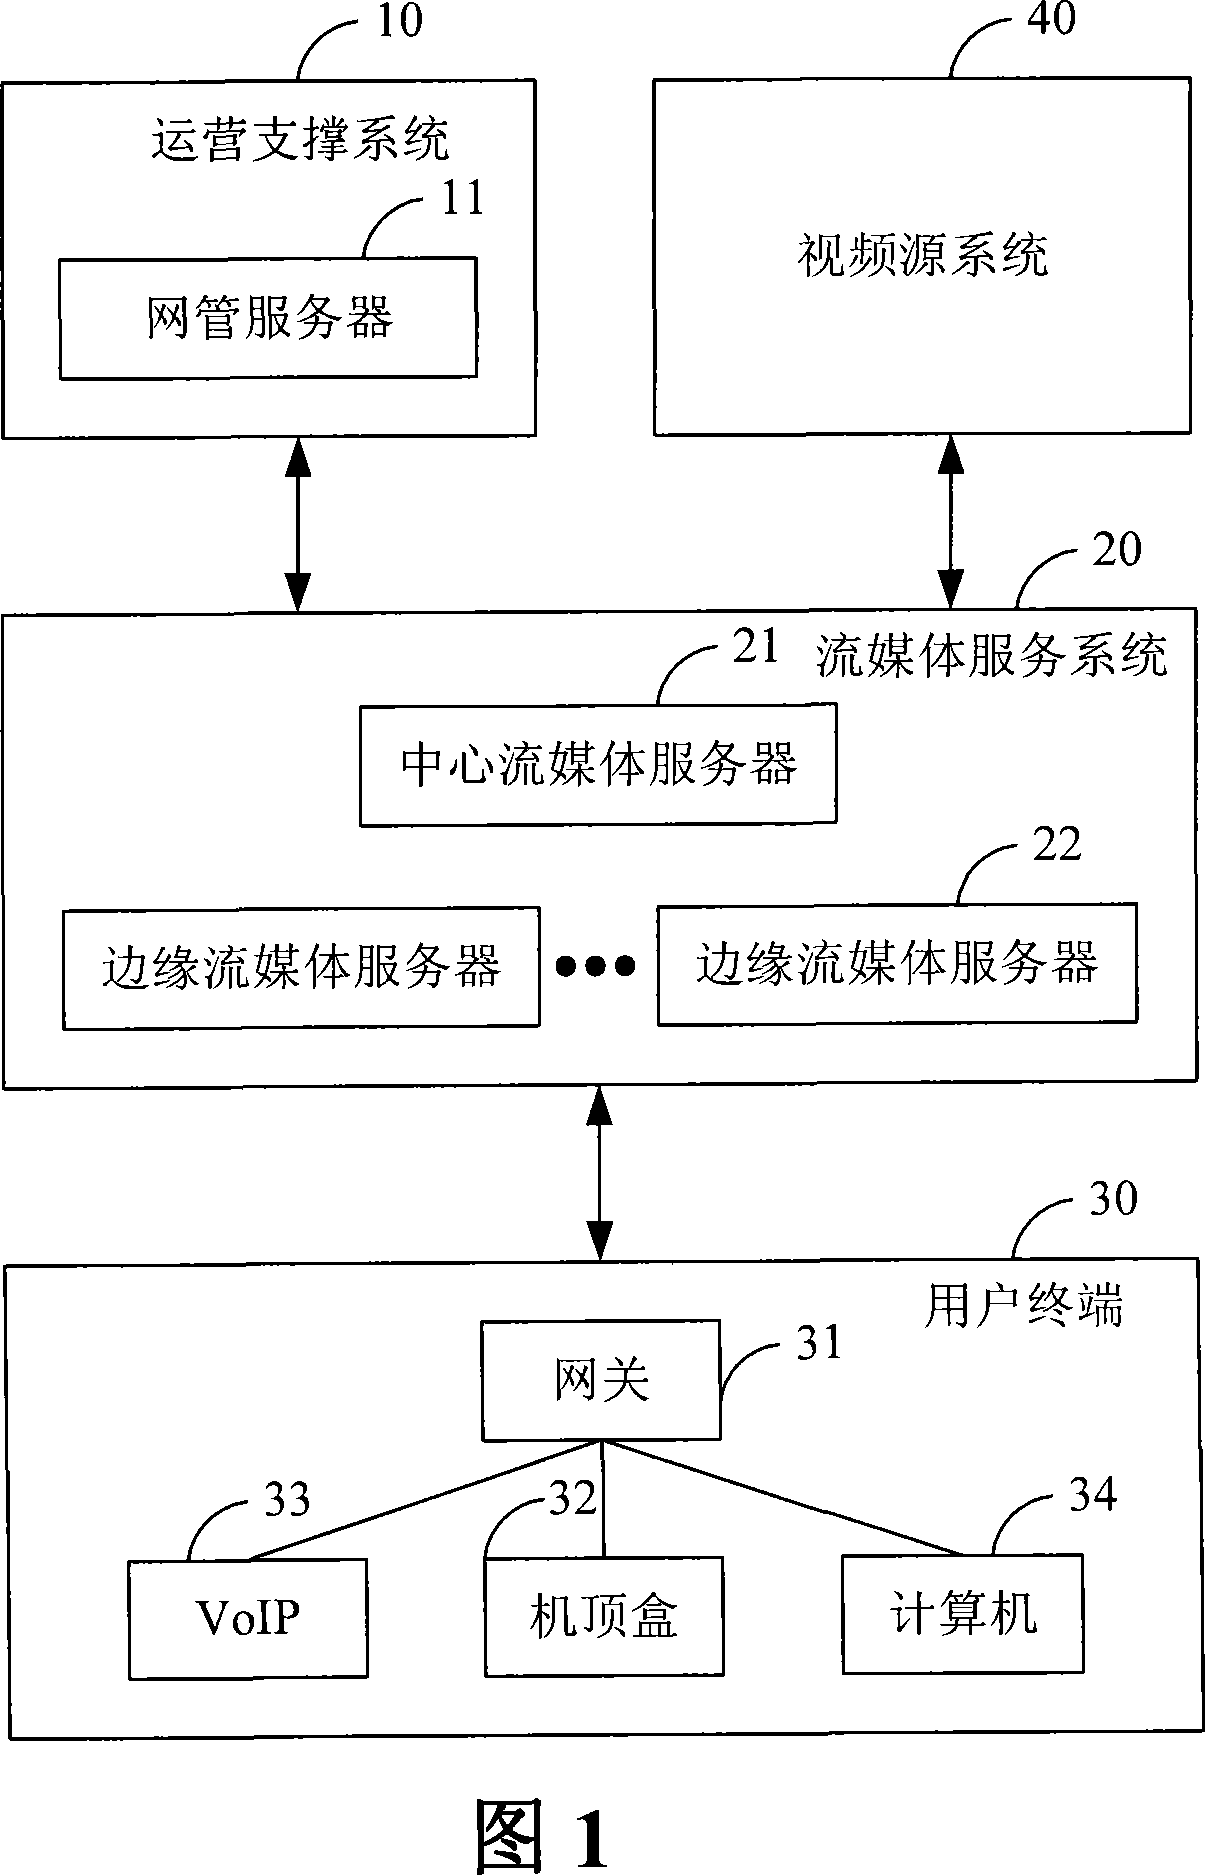 Measuring apparatus and measuring method for IPTV access network